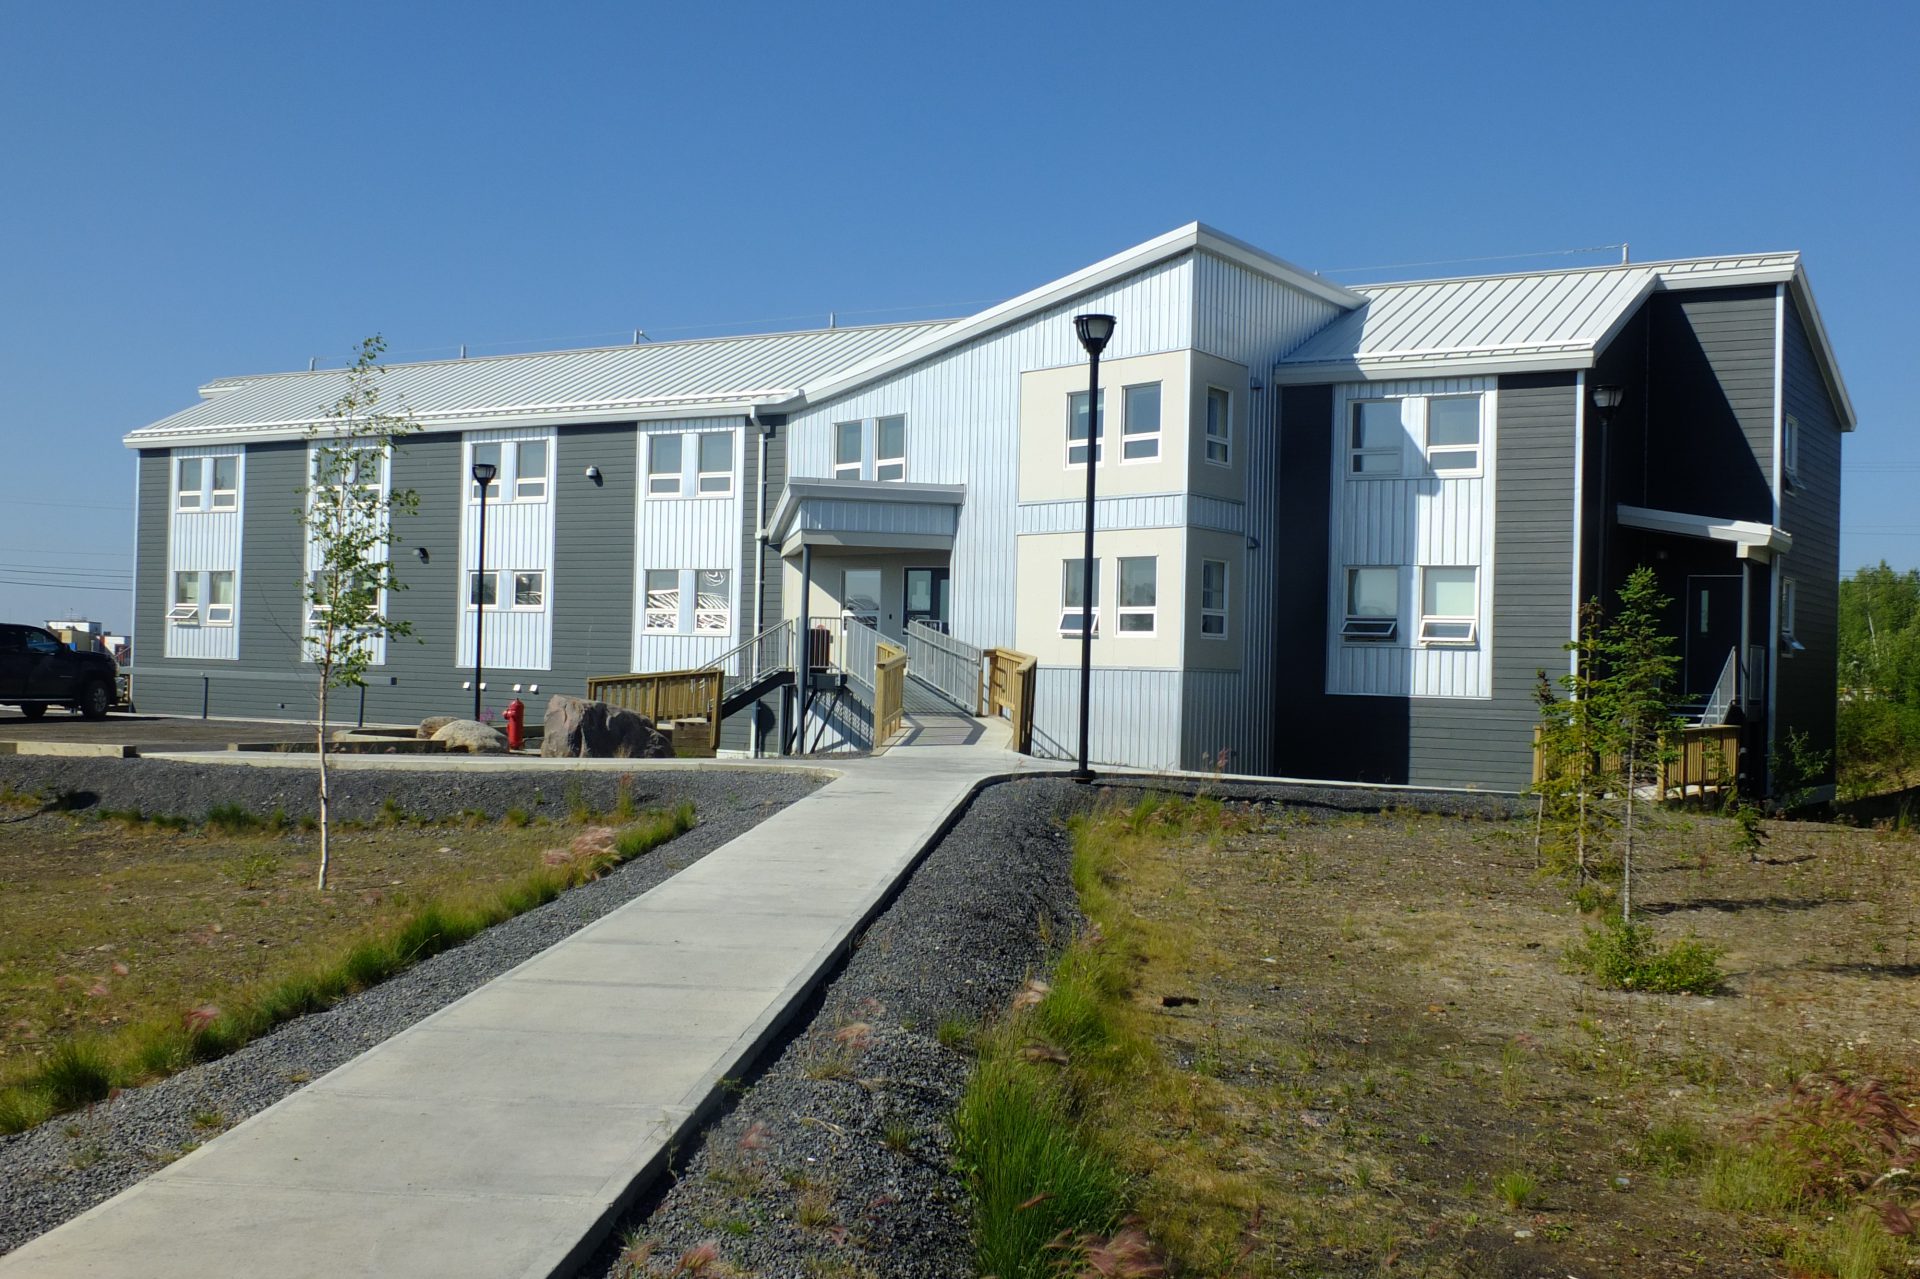 Reasons The Student Housing Facilities Are Beneficial